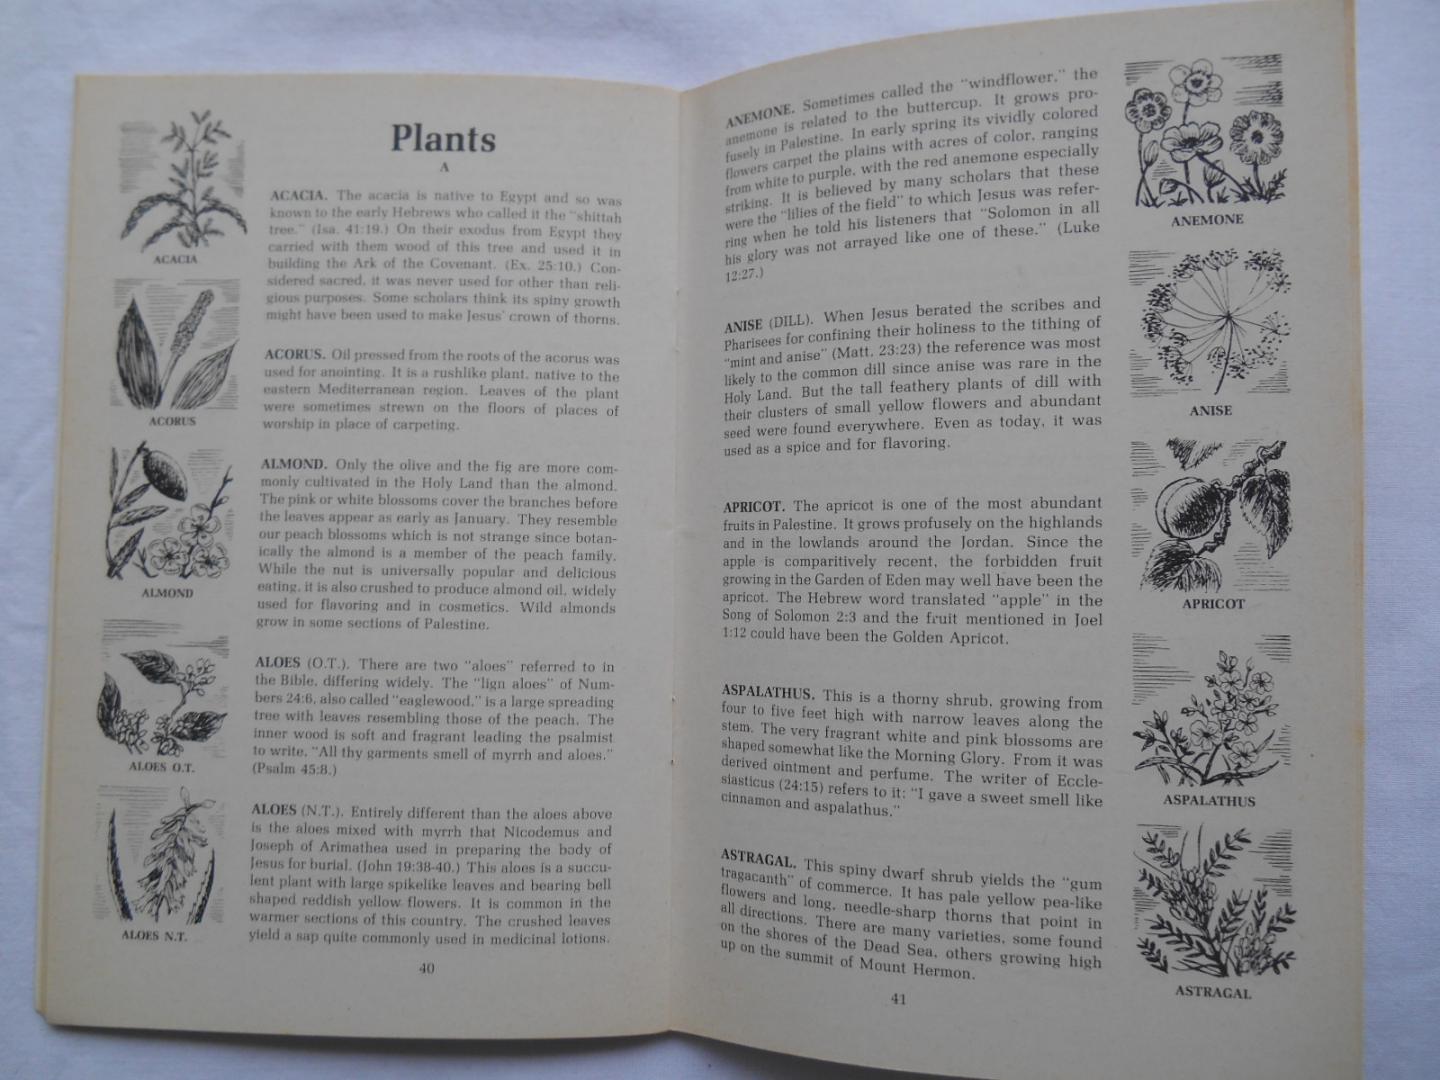 Smith, Willard S. - Animals, birds and plants of the Bible